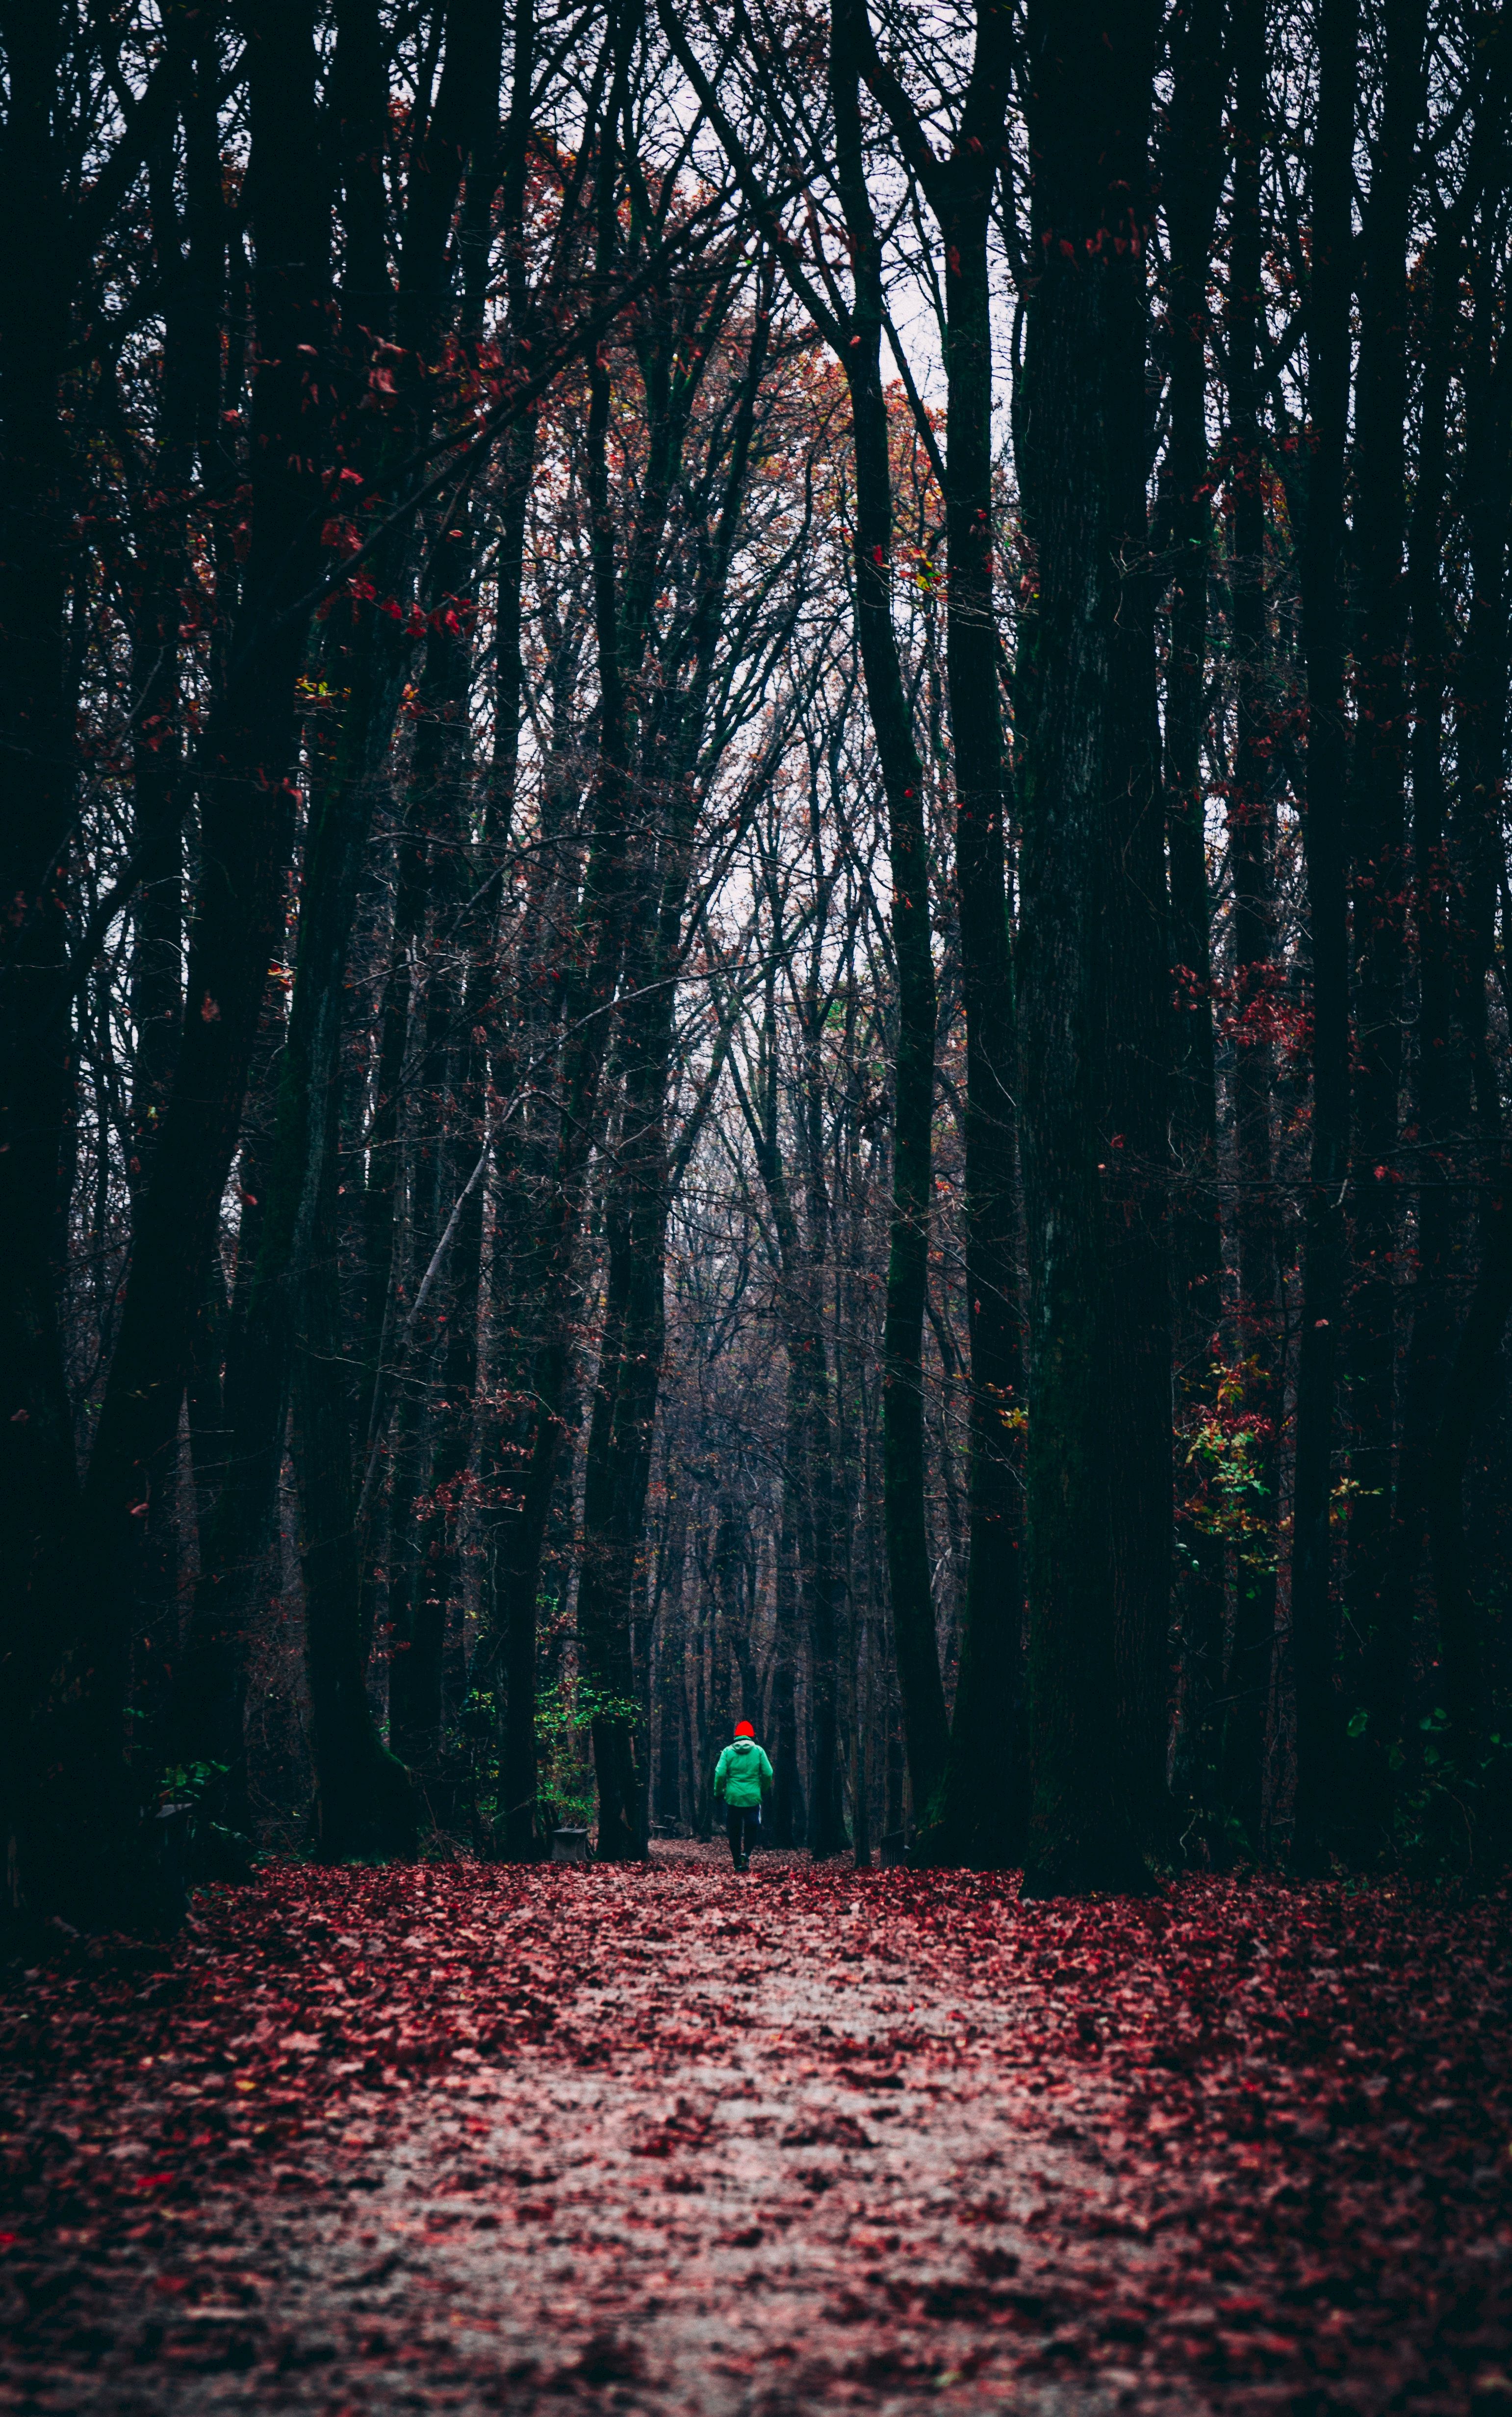 forest, nature, autumn, foliage, human, person, alone, lonely, run, running Image for desktop